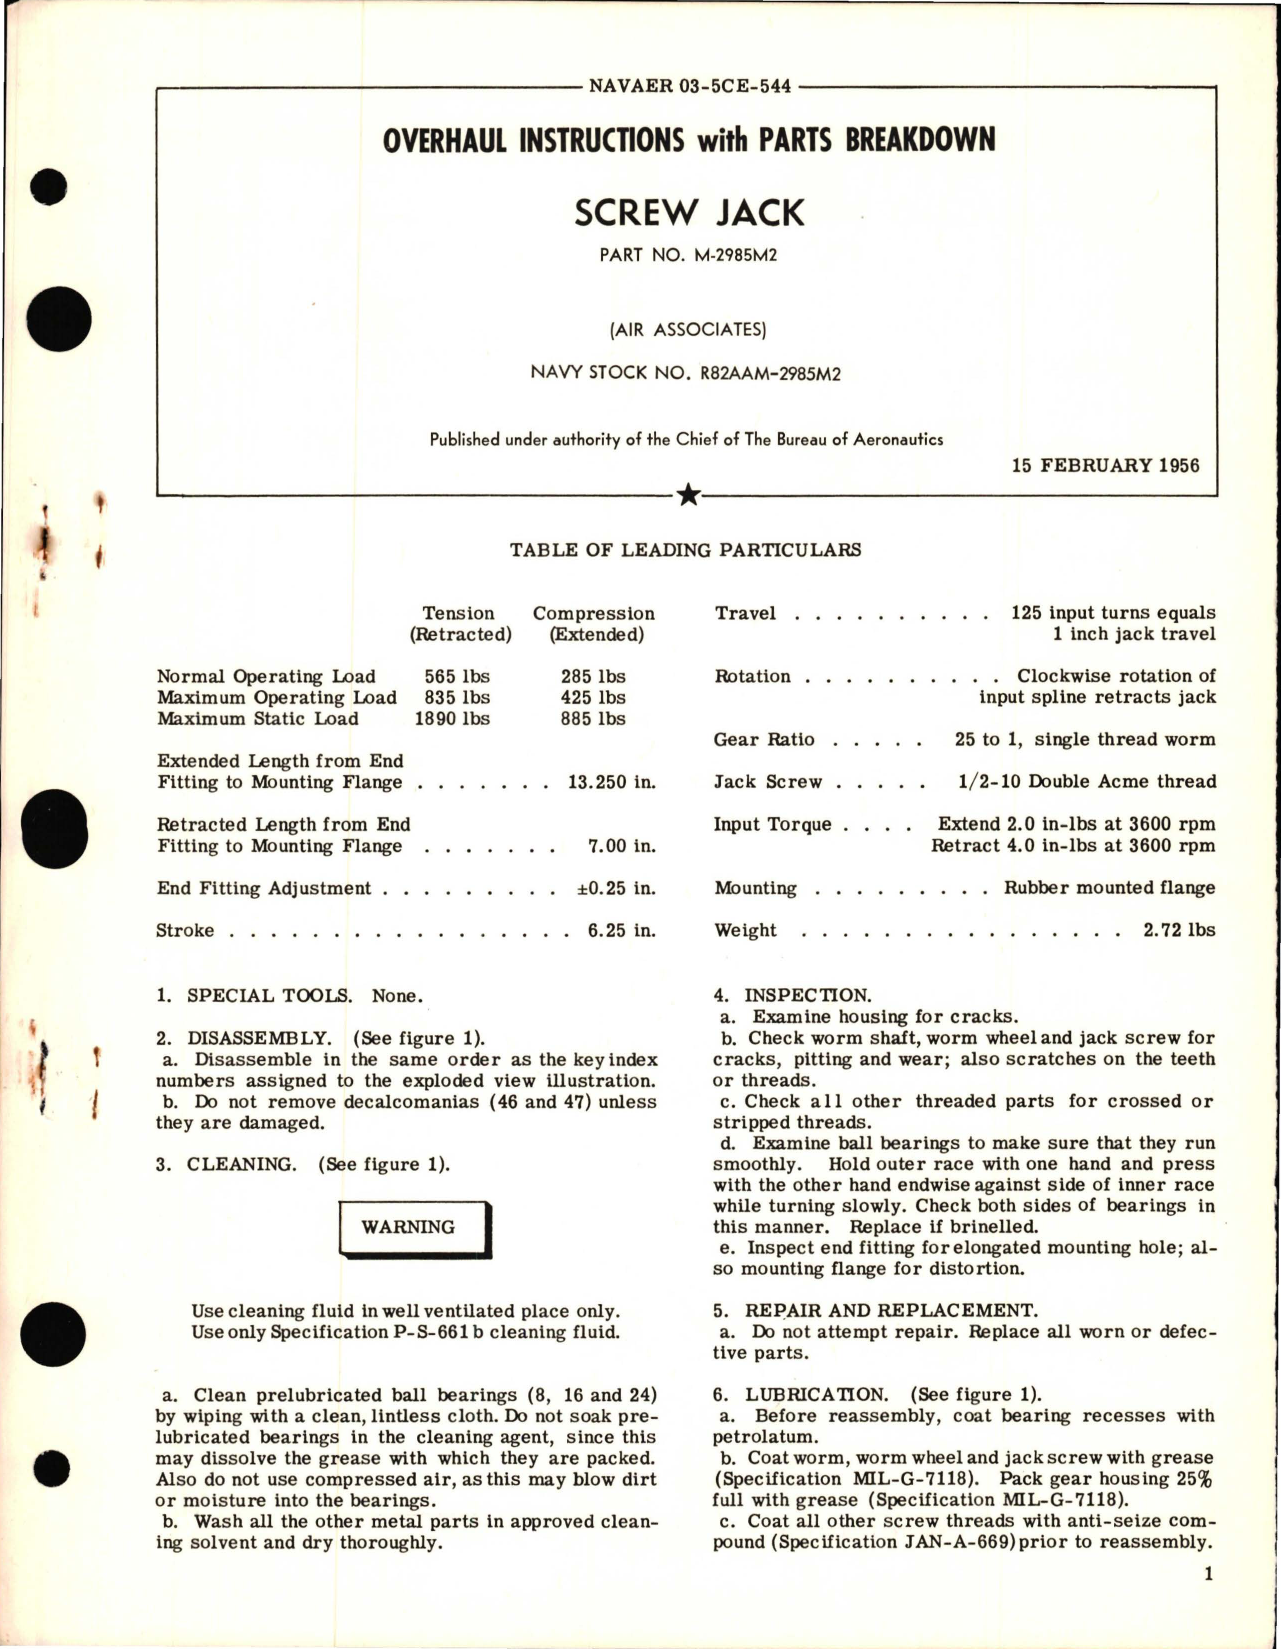 Sample page 1 from AirCorps Library document: Overhaul Instructions with Parts Breakdown for Screw Jack - Part M-2985M2, 